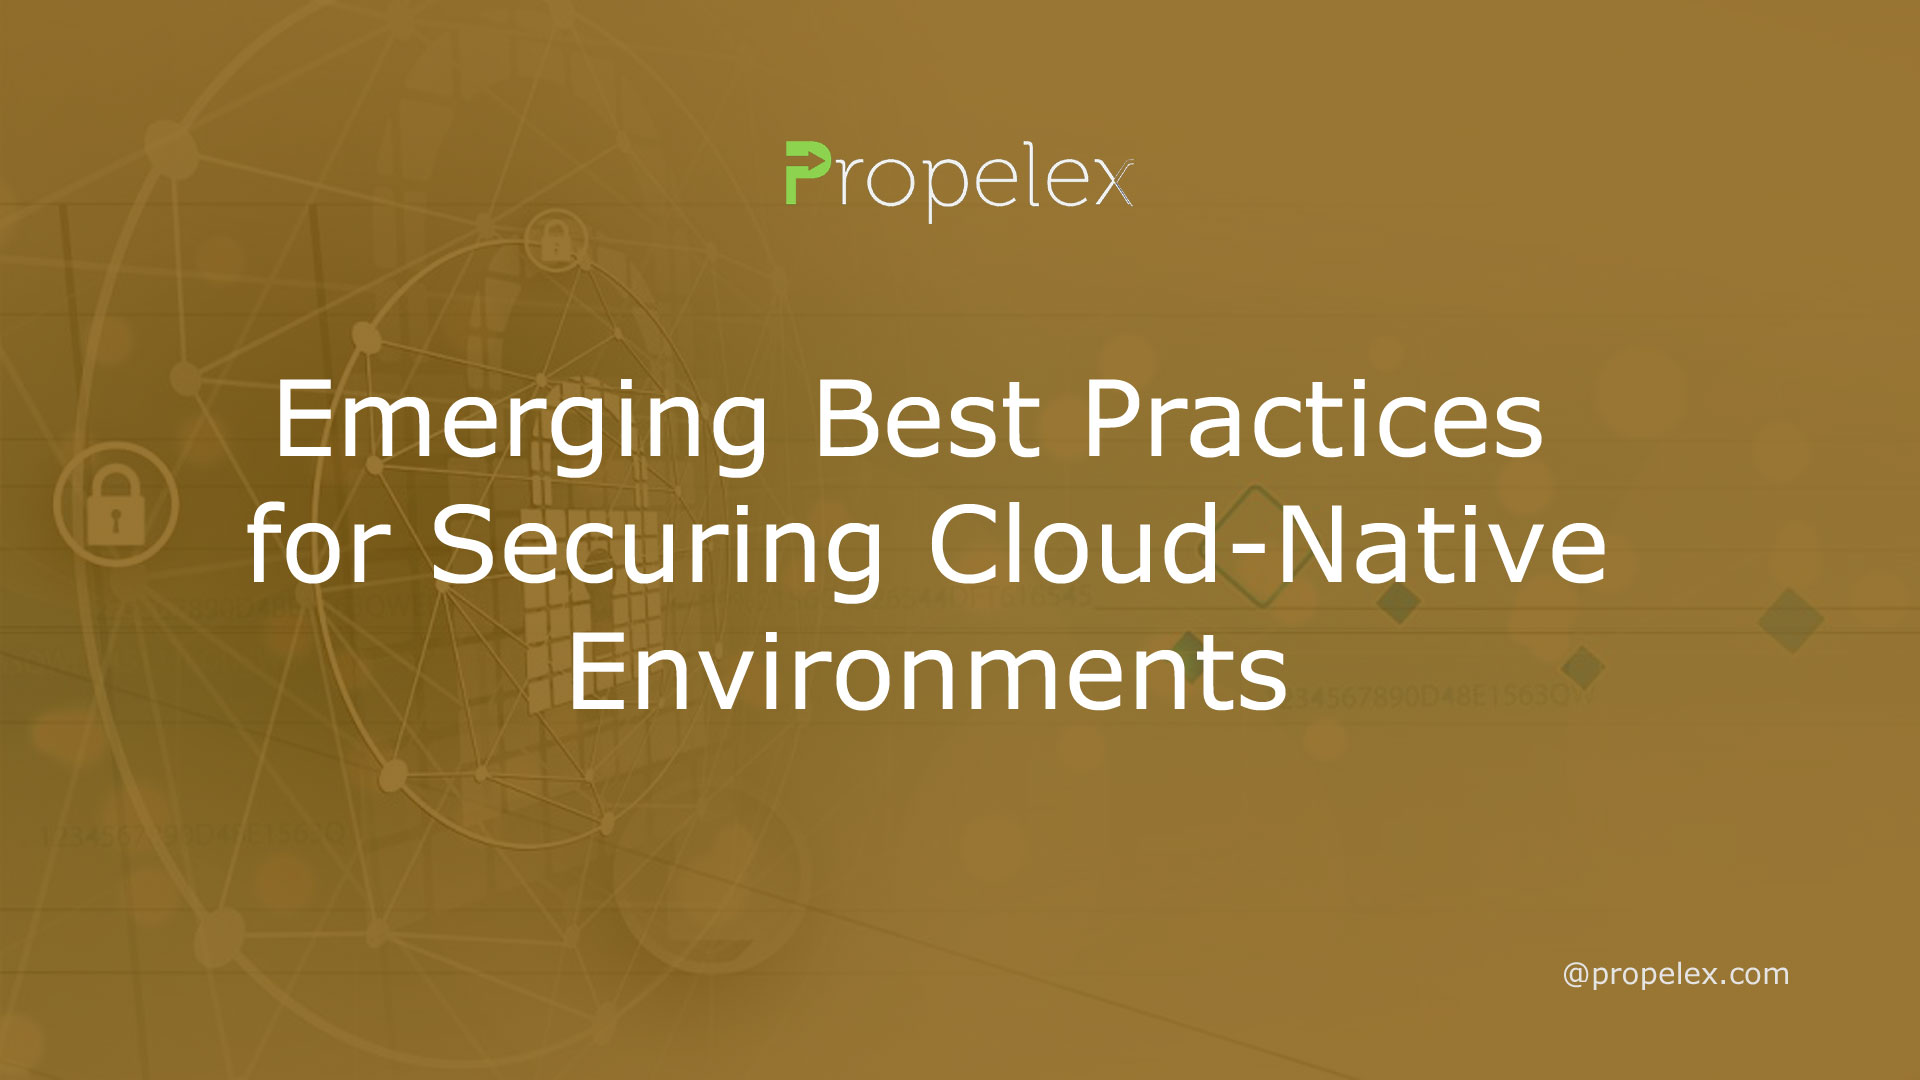 Emerging Best Practices for Securing Cloud-Native Environments